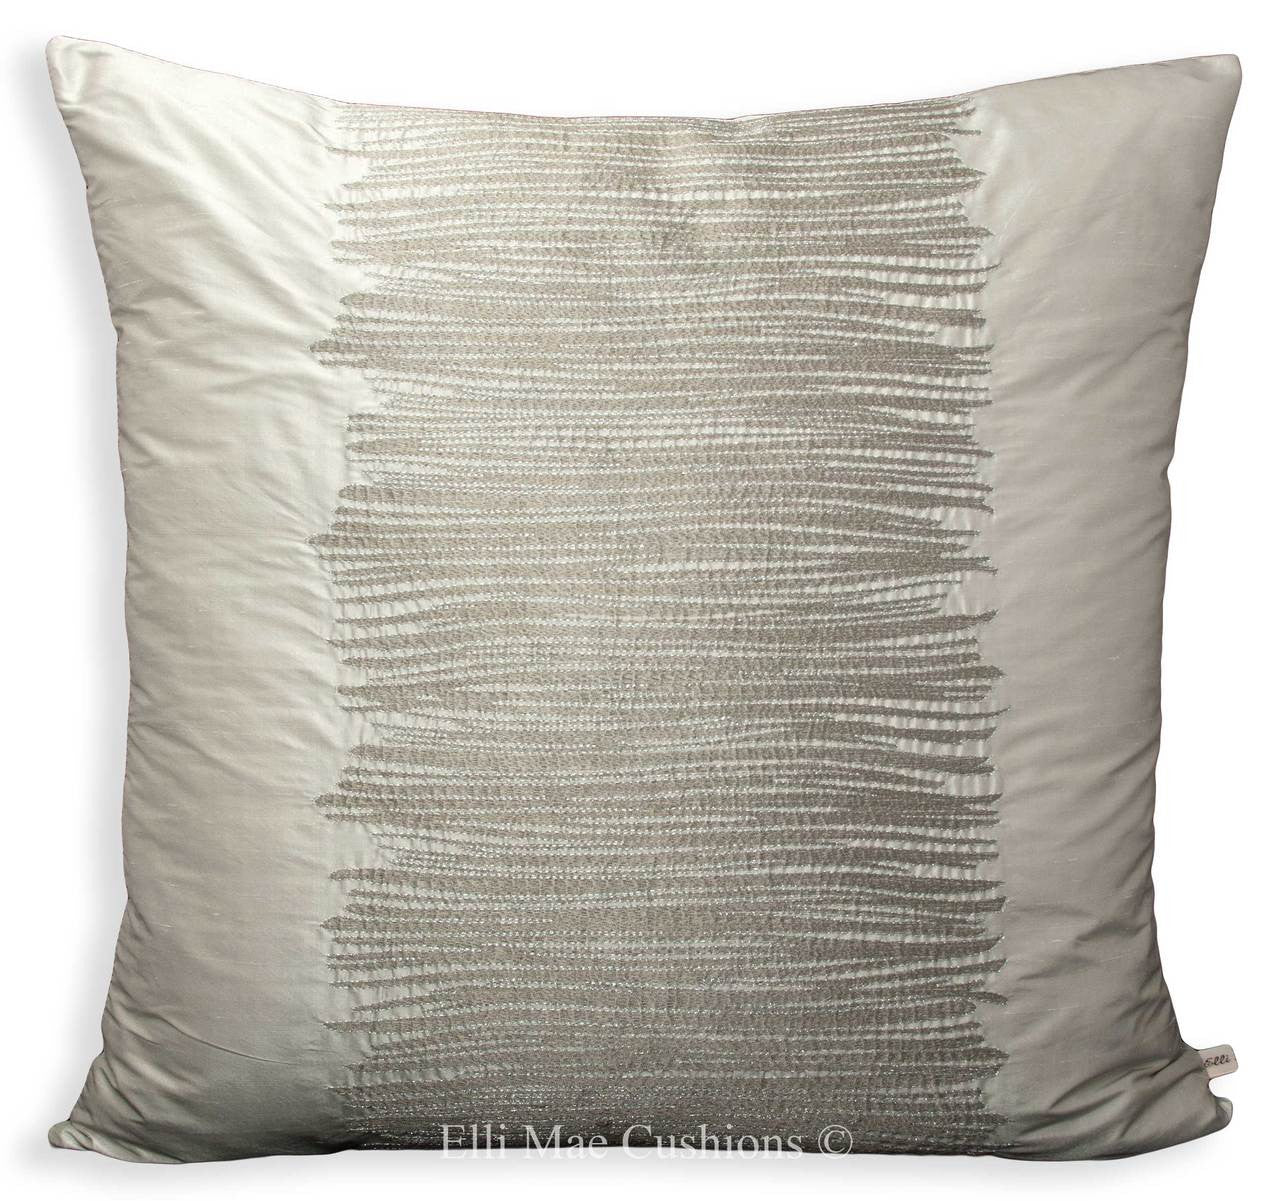 Zimmer and Rohde (Ardecora) Luce Designer Fabric Silver Embroidered Cushion Pillow Cover